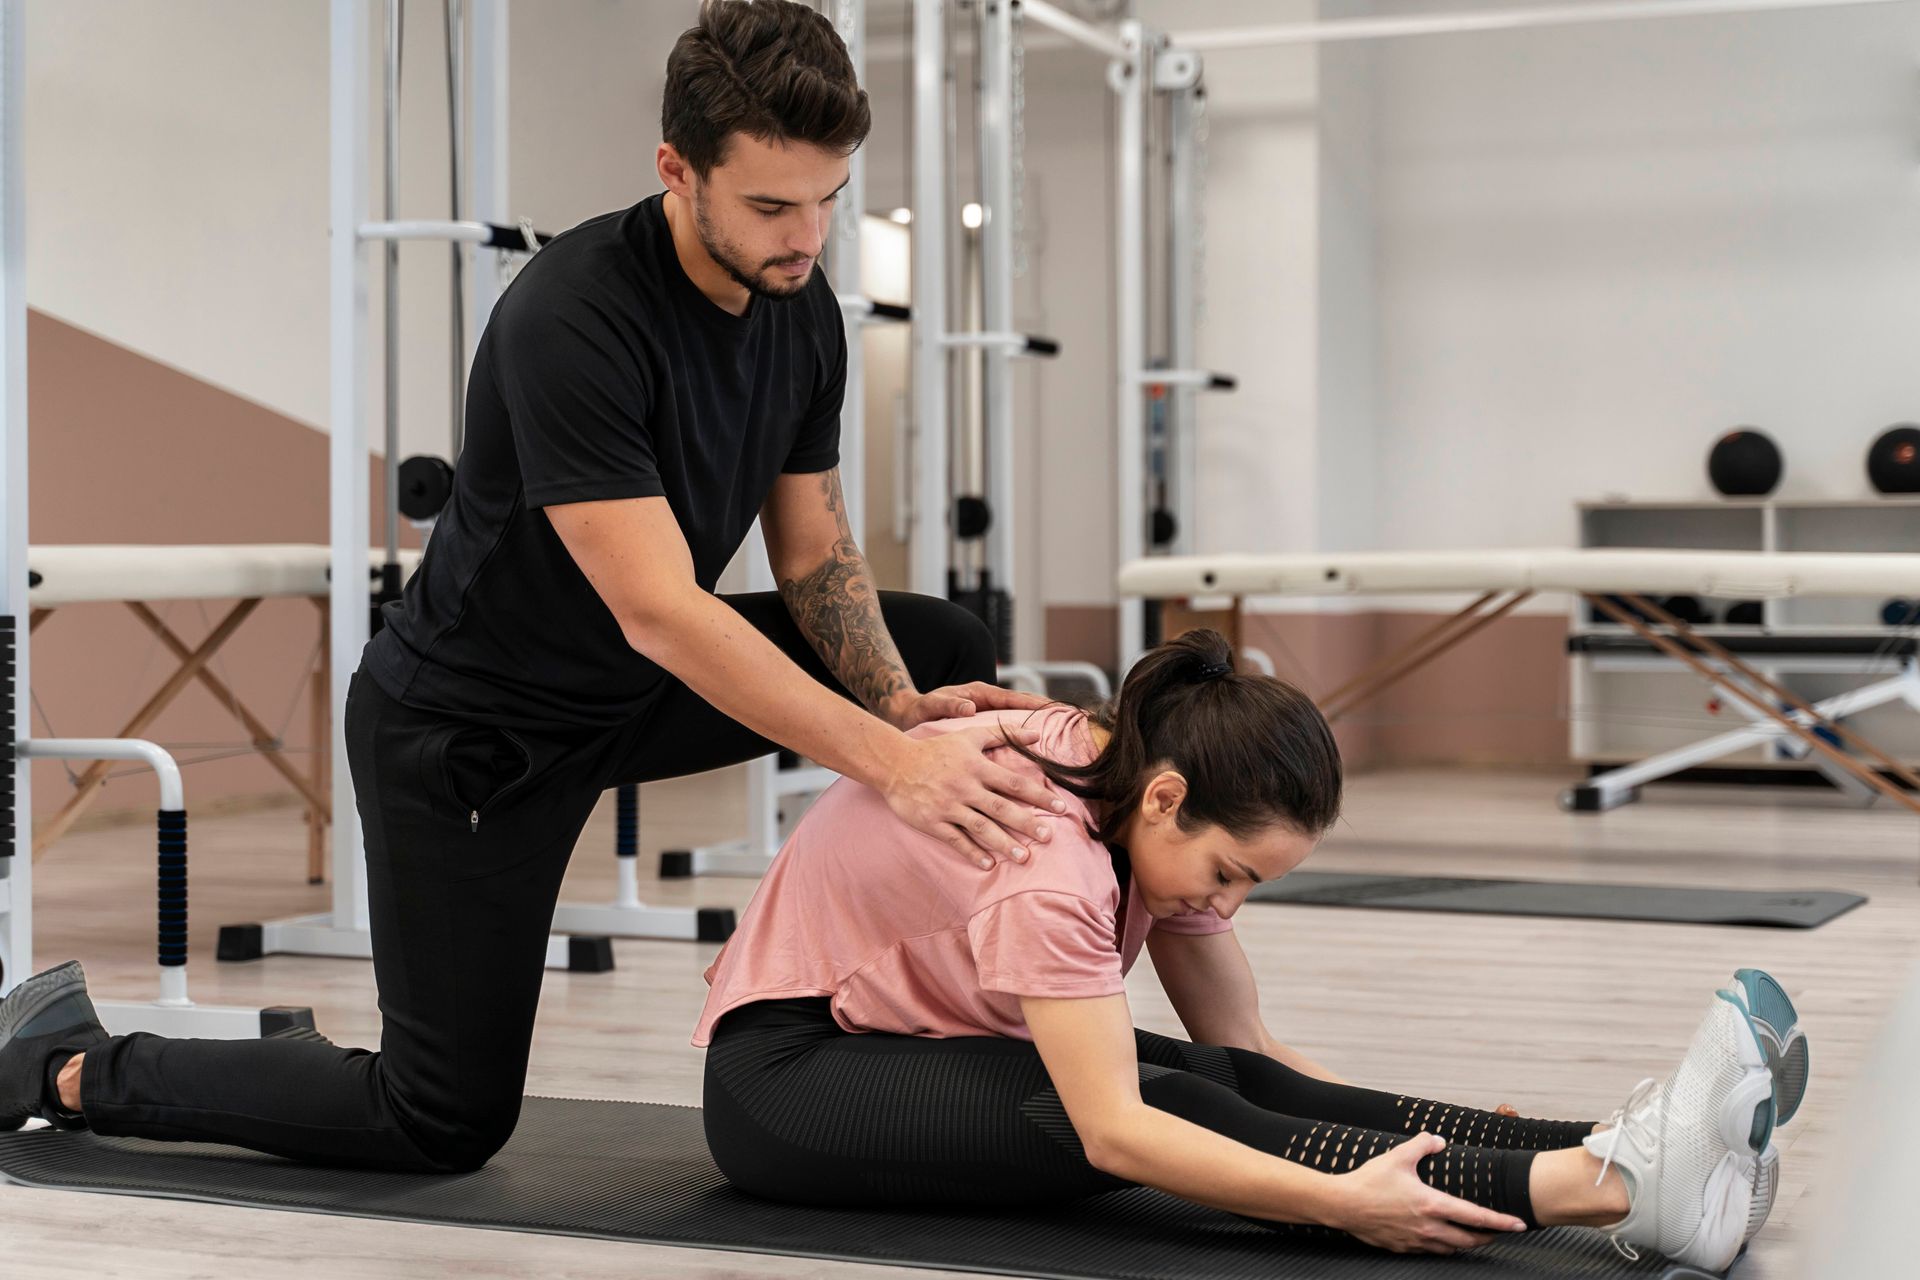 a man is helping a woman stretch her legs in a gym .